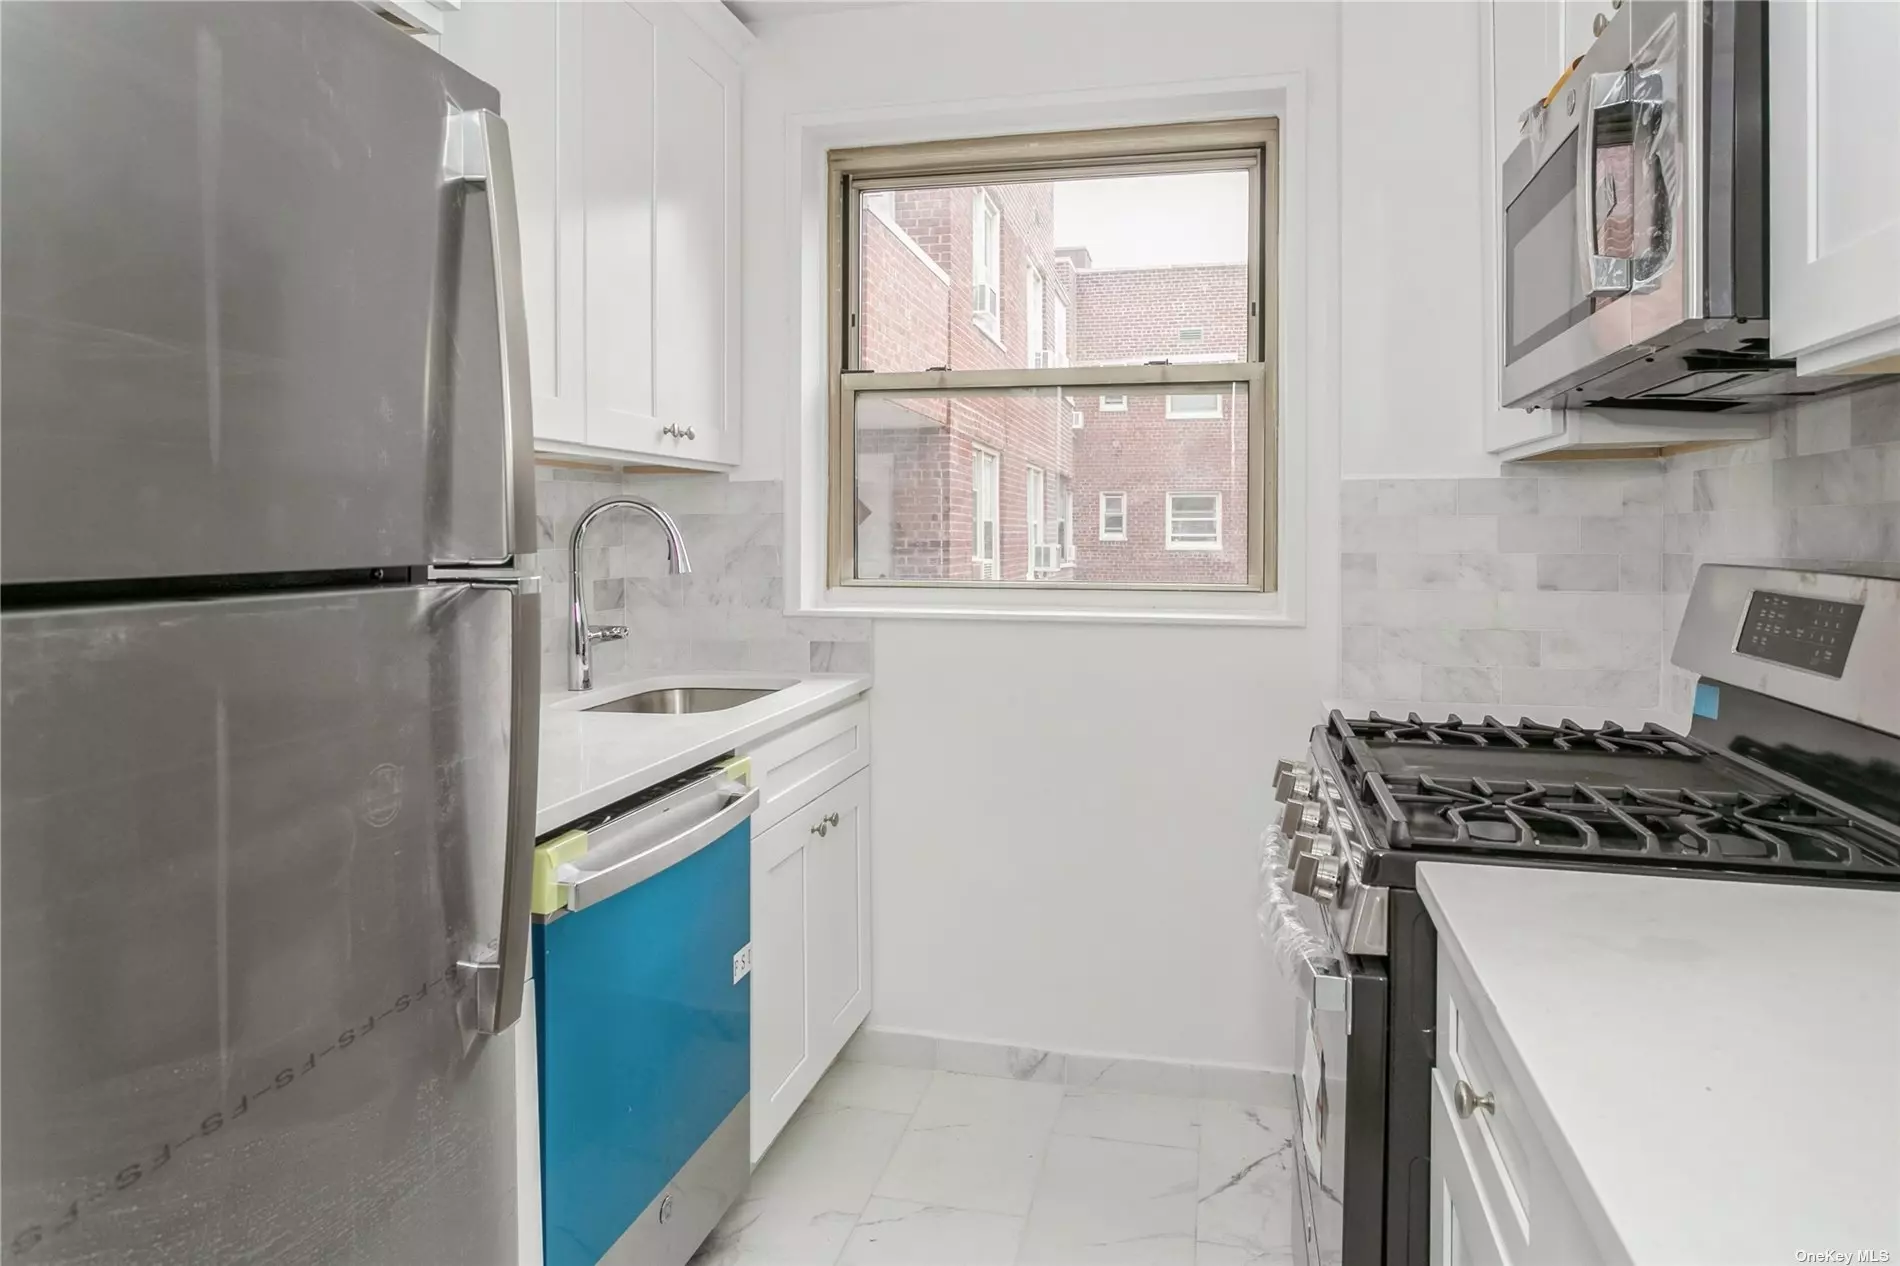 New renovated apartment with new kitchen and stainless steel appliances. New bath with walk in shower. New high hats, hardwood floors throughout. Lots of closet space. Separate dining area. High floor with lots of light. 16 Hour doorman. Garage Parking short waitlist.